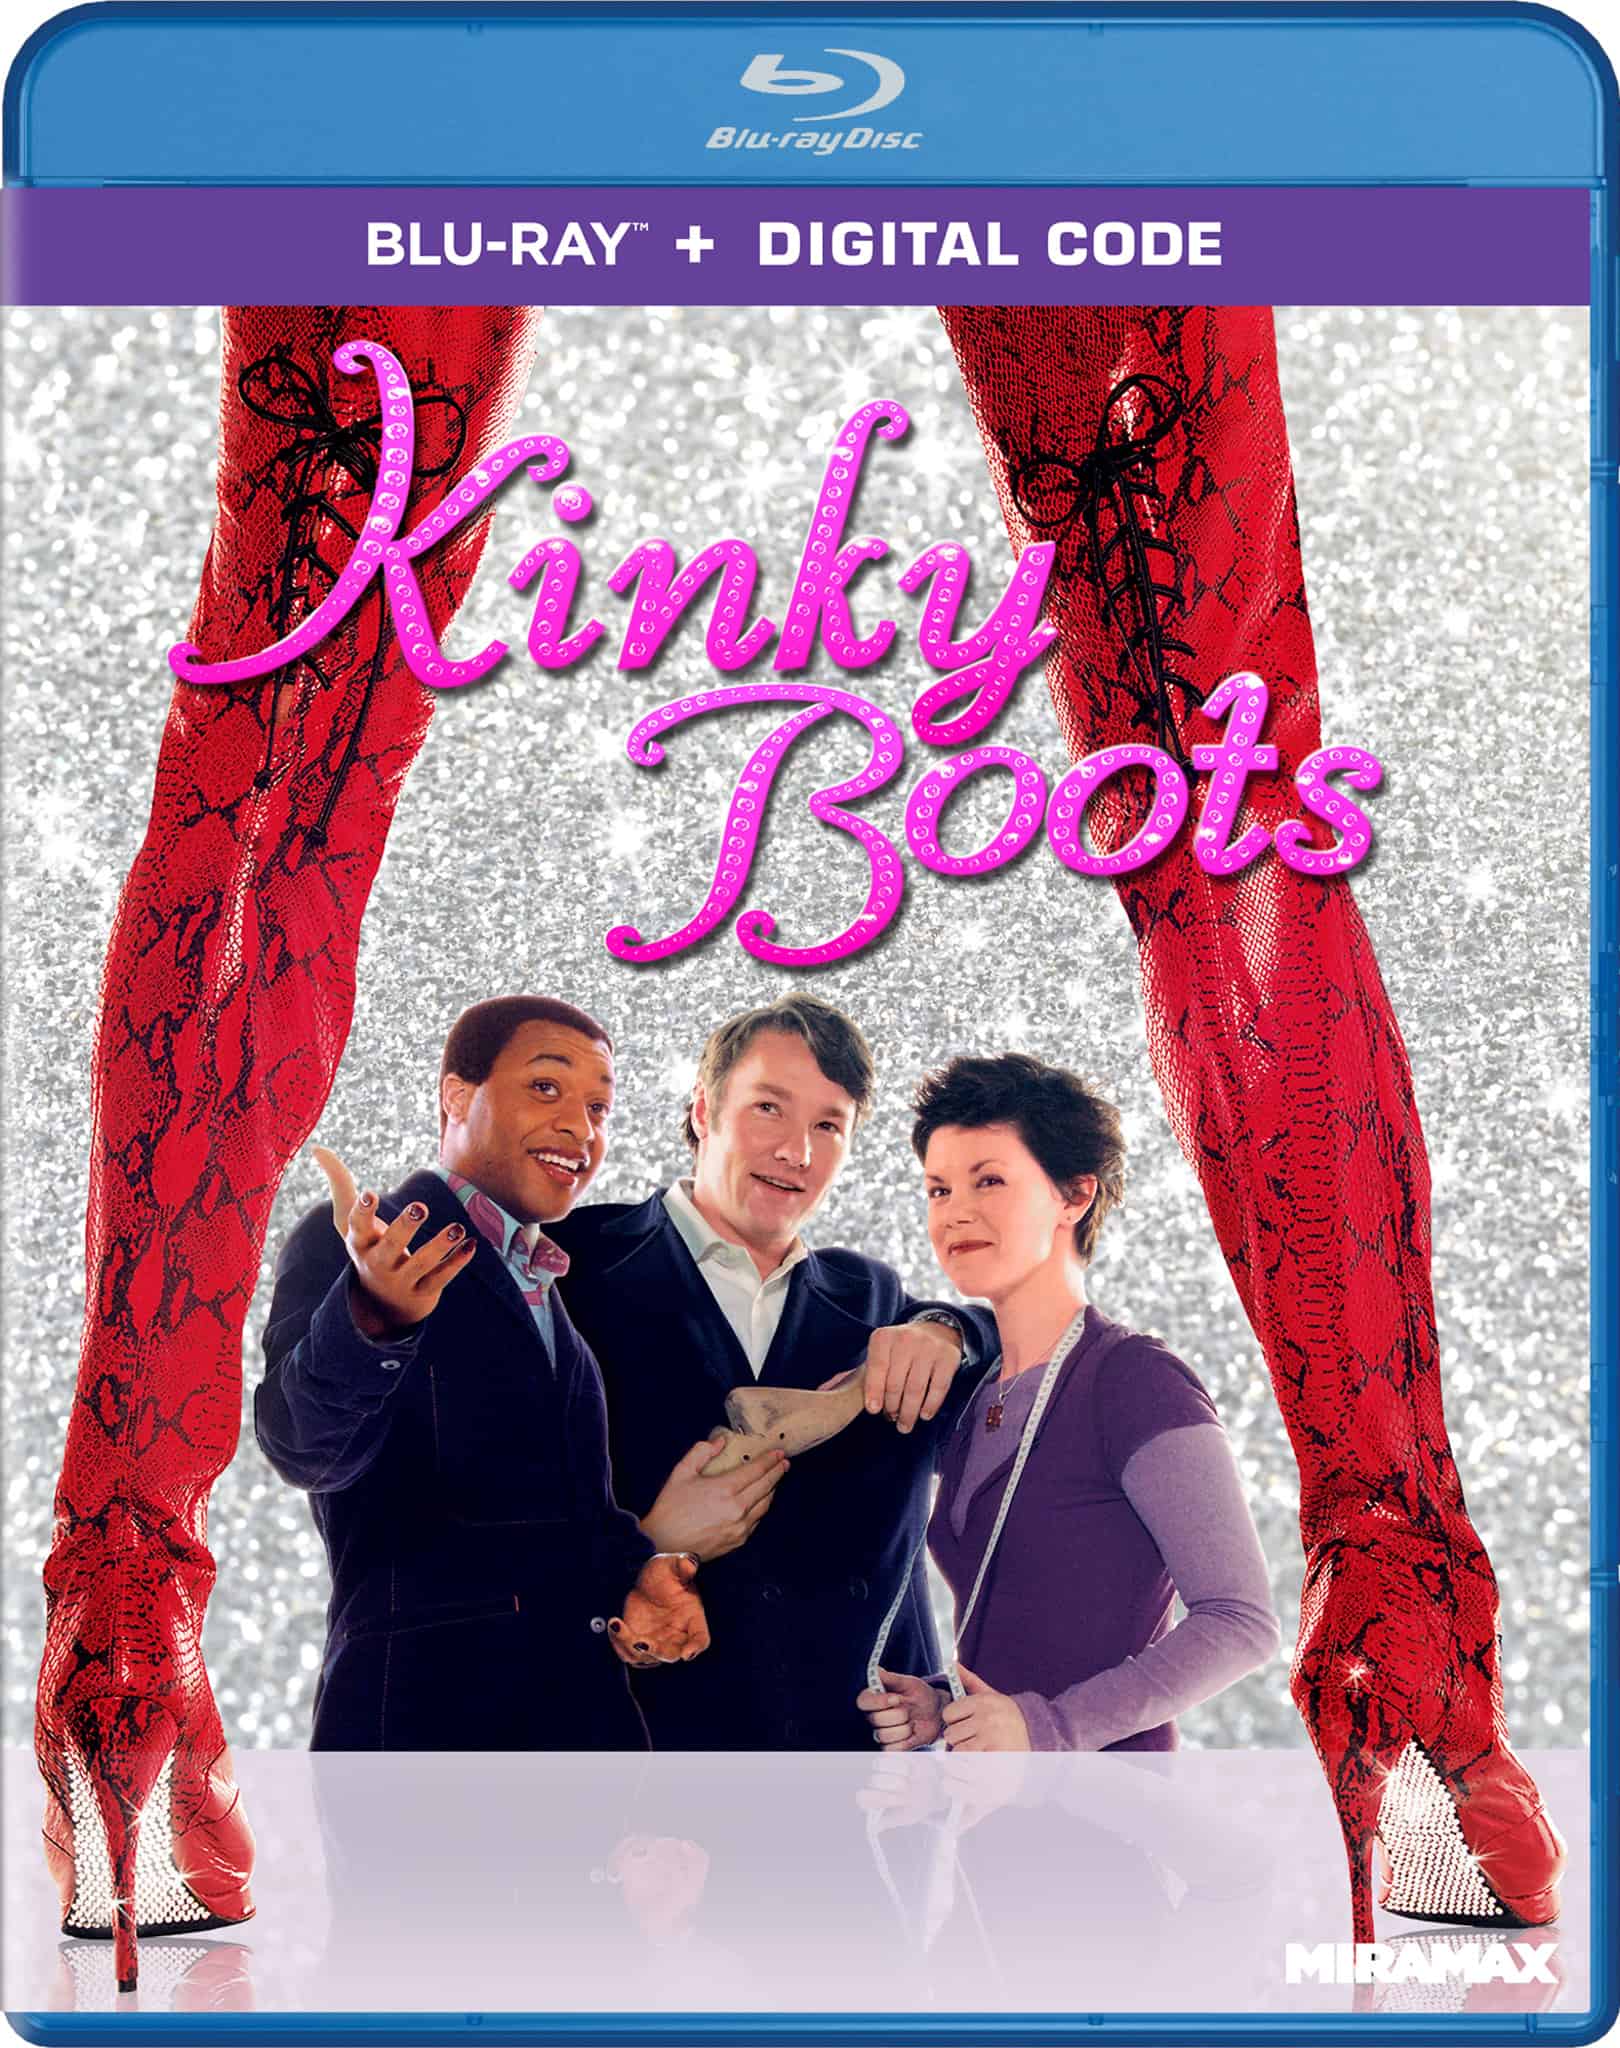 Kinky Boots wonderfully stomps Blu-ray on May 31st 18